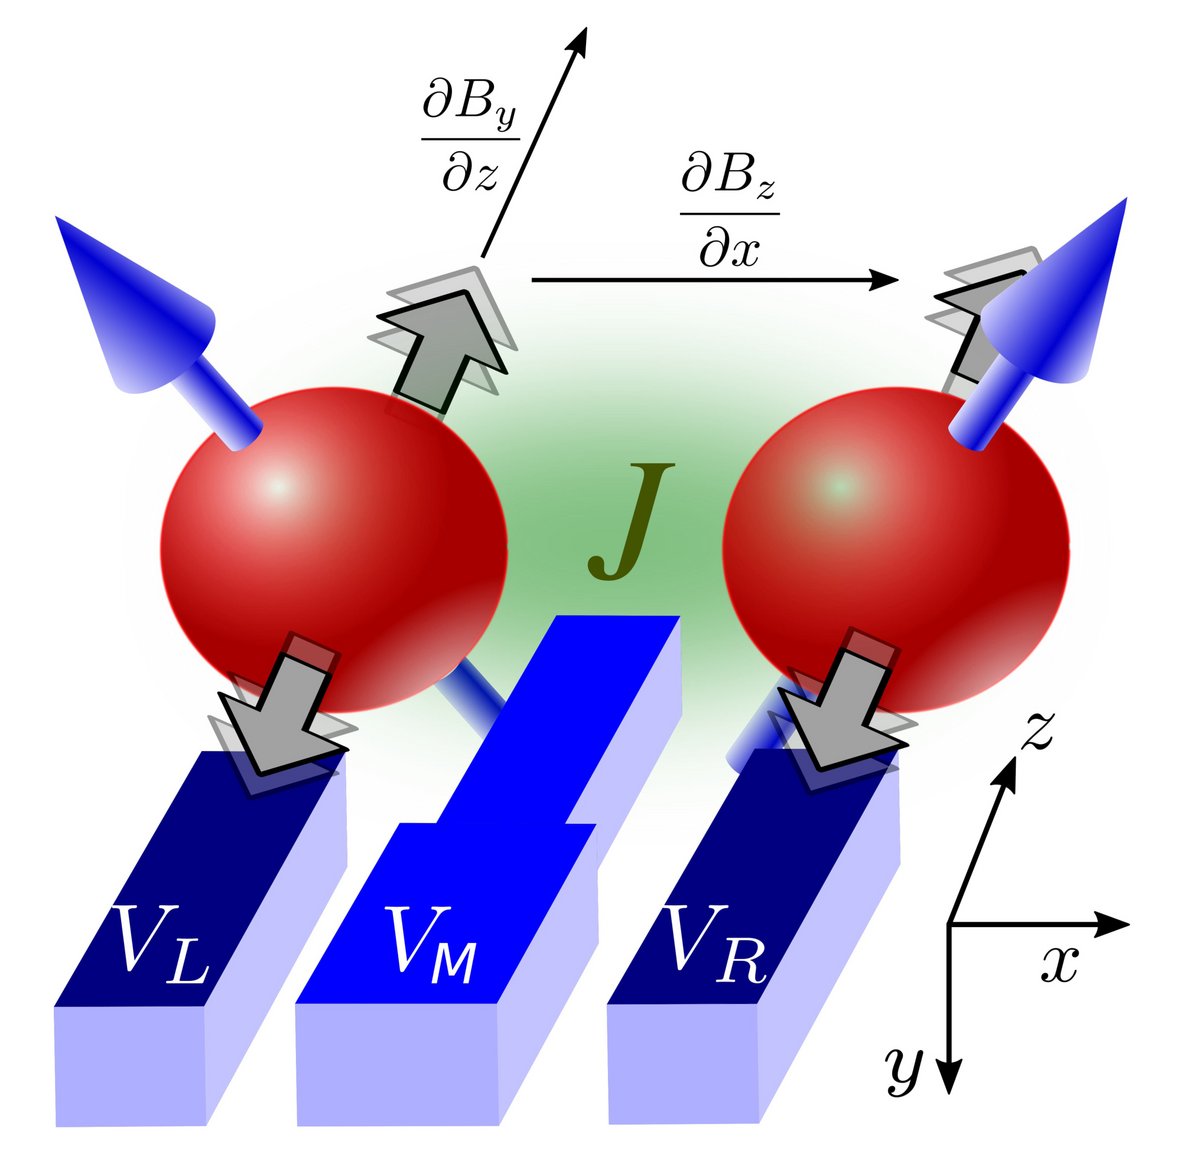 Quantum gates of two silicon electrons. Two nano-electrodes (VL and VR) control the angular momentum of both electrons. A third nano-electrode (VM) coordinates the interaction of both electrons.